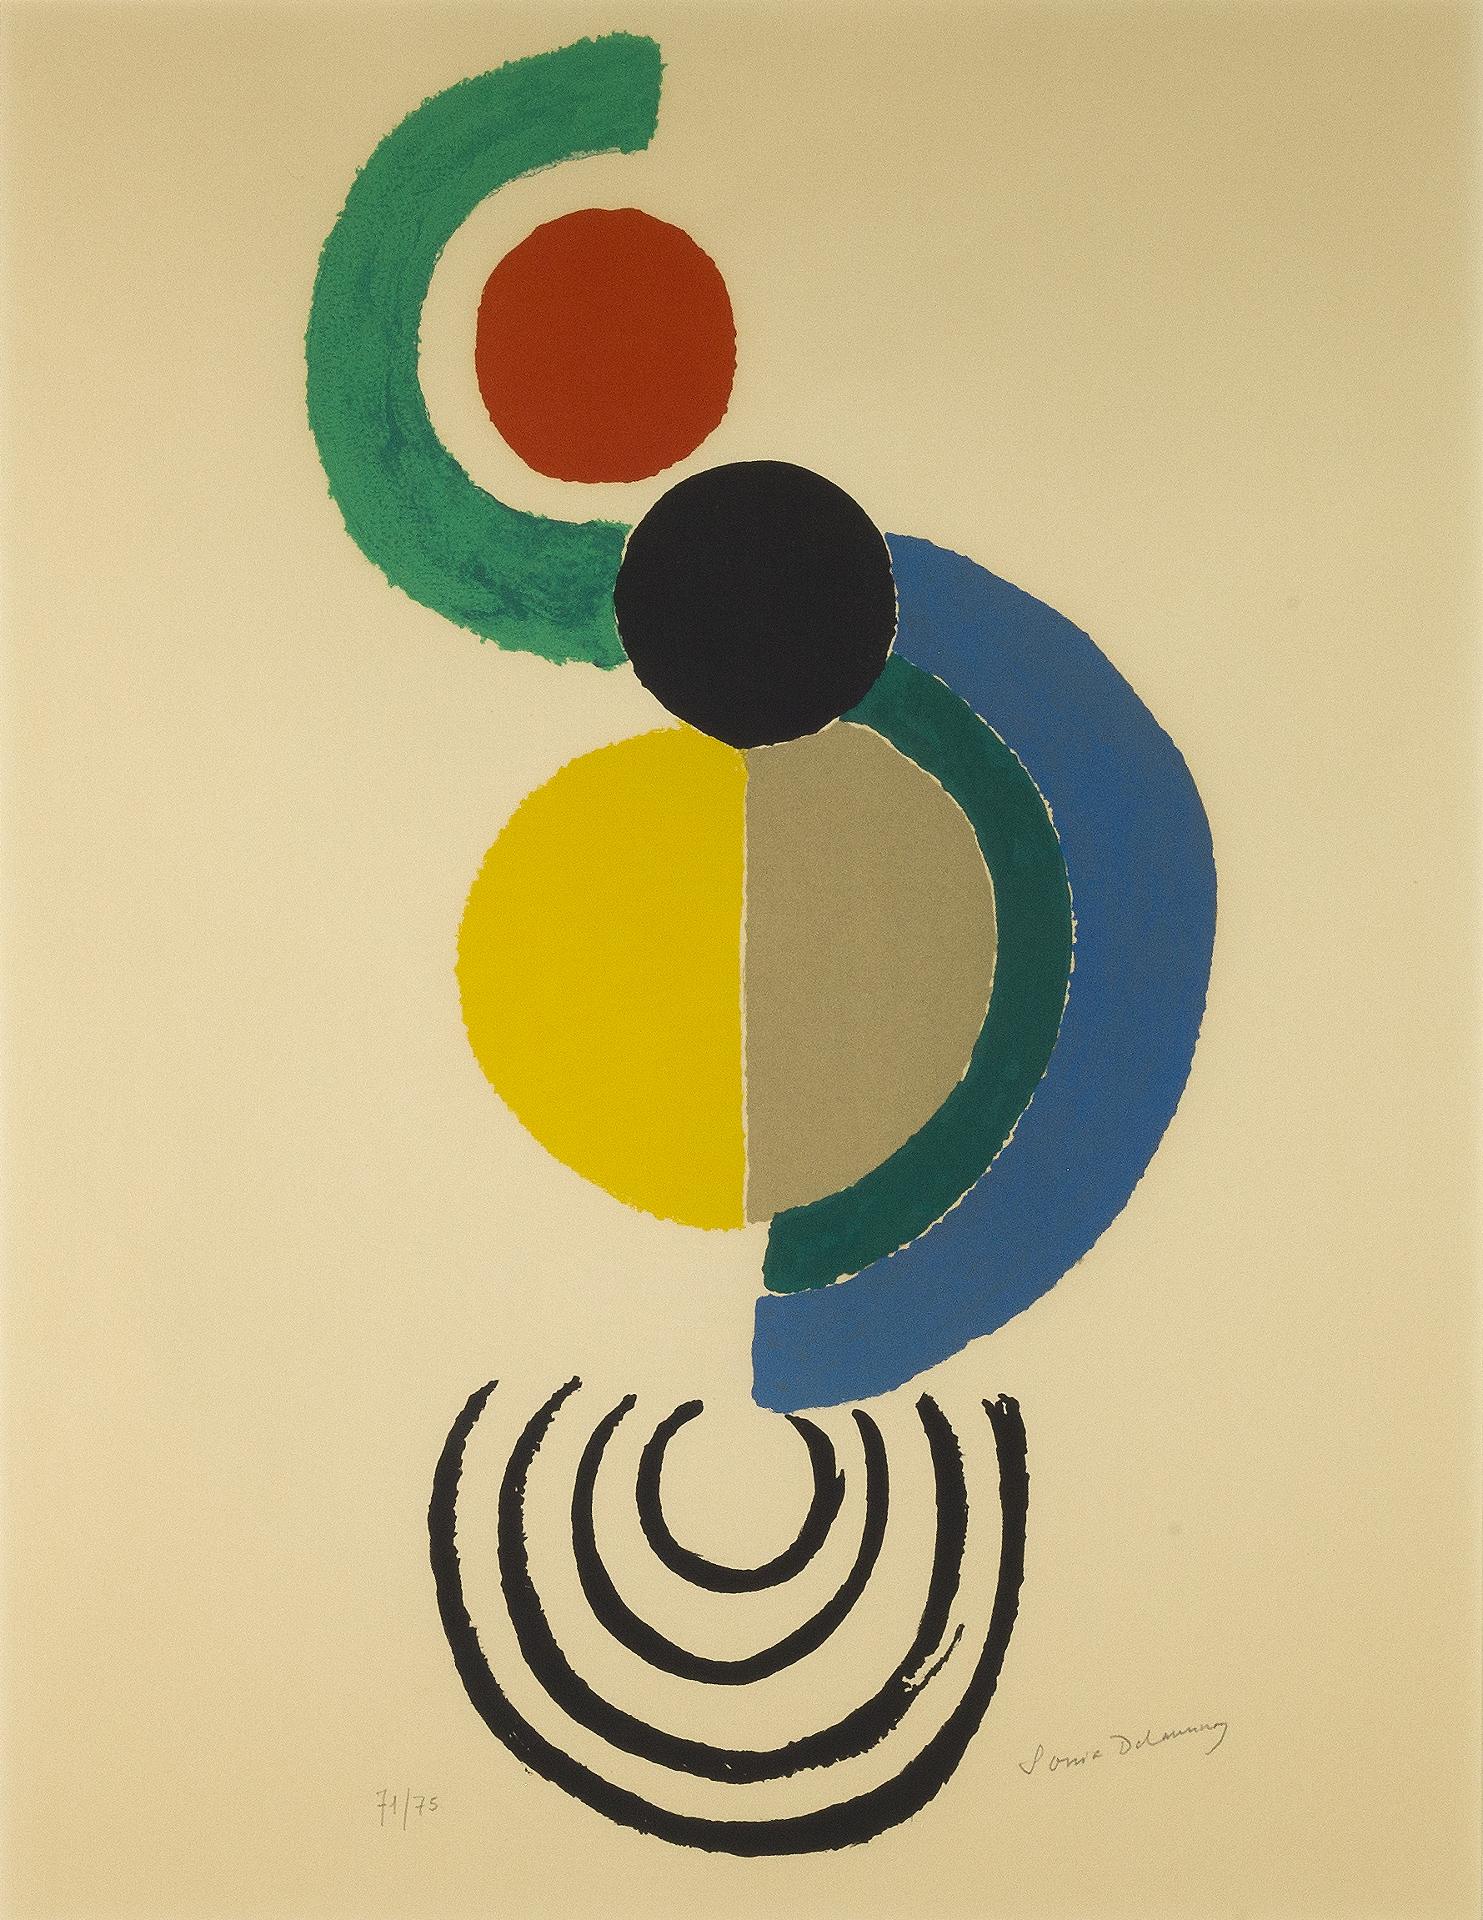 Coccinelle, c. 1970 - - made by Sonia Delaunay